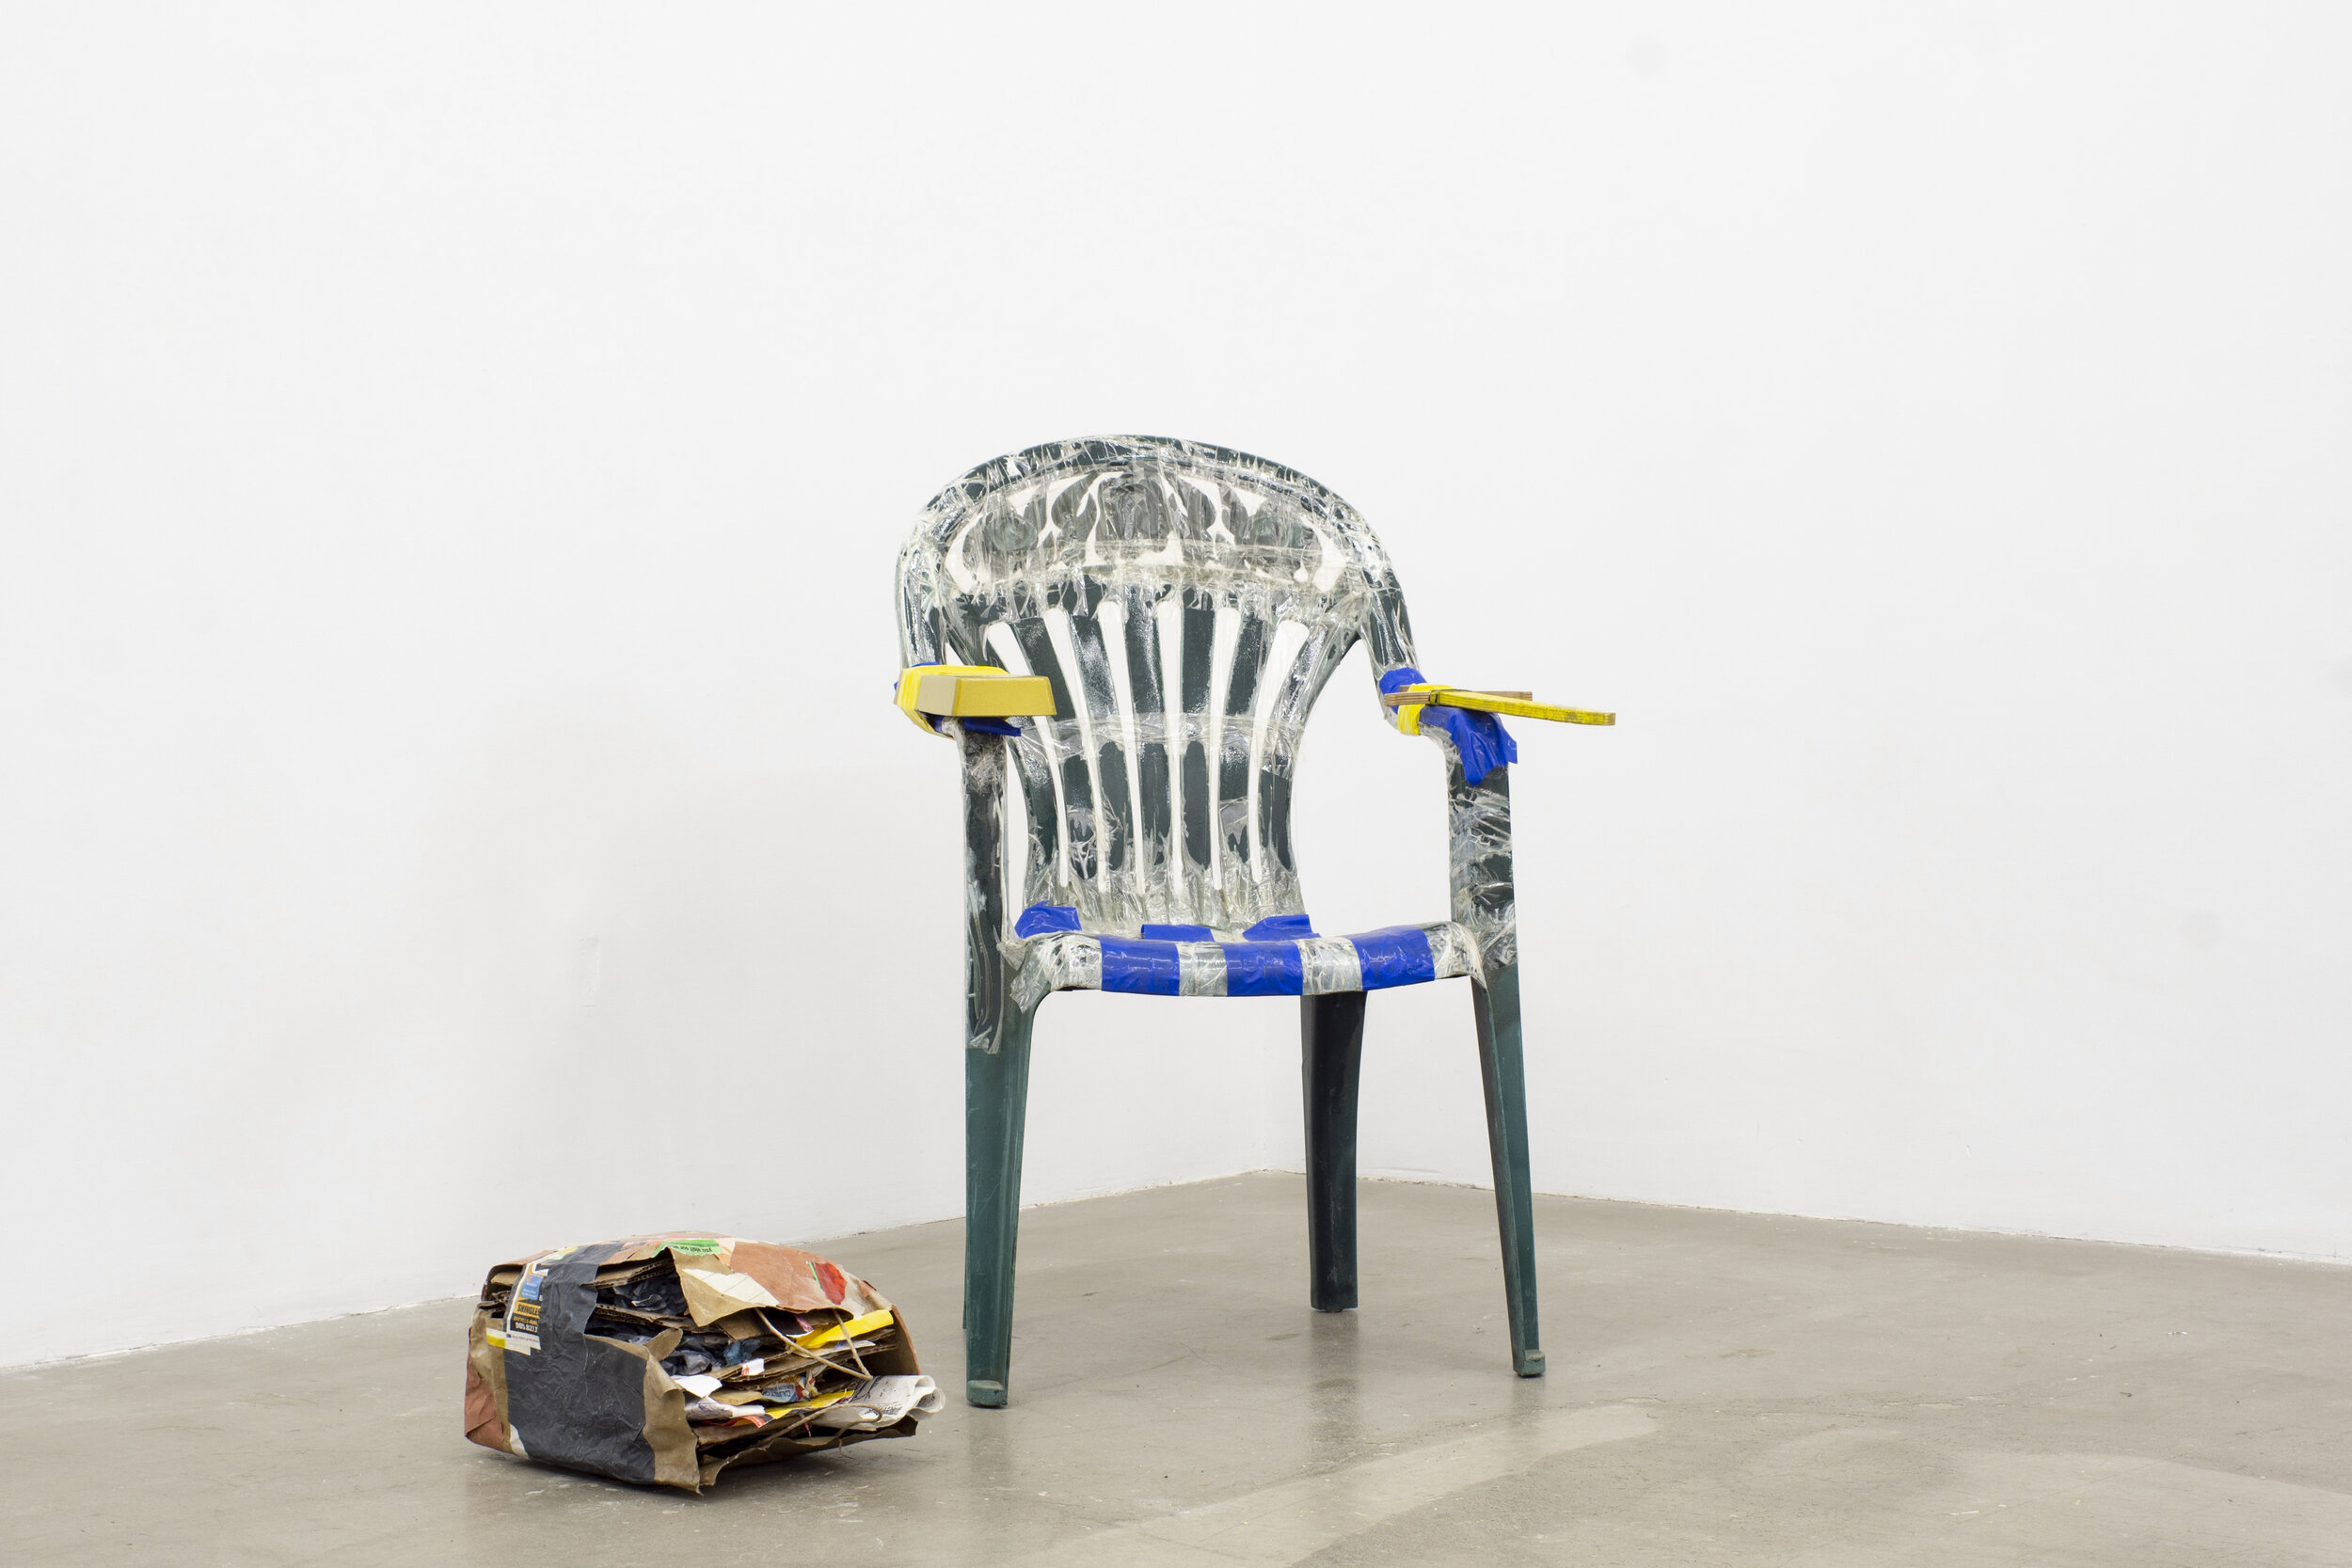  Georgia Dickie,  Moment of Serious Poignancy (Throne) , 2021 Found objects, plastic, chair, and tape, 37 x 24 x 32 in (94 x 61 x 81.3 cm)  